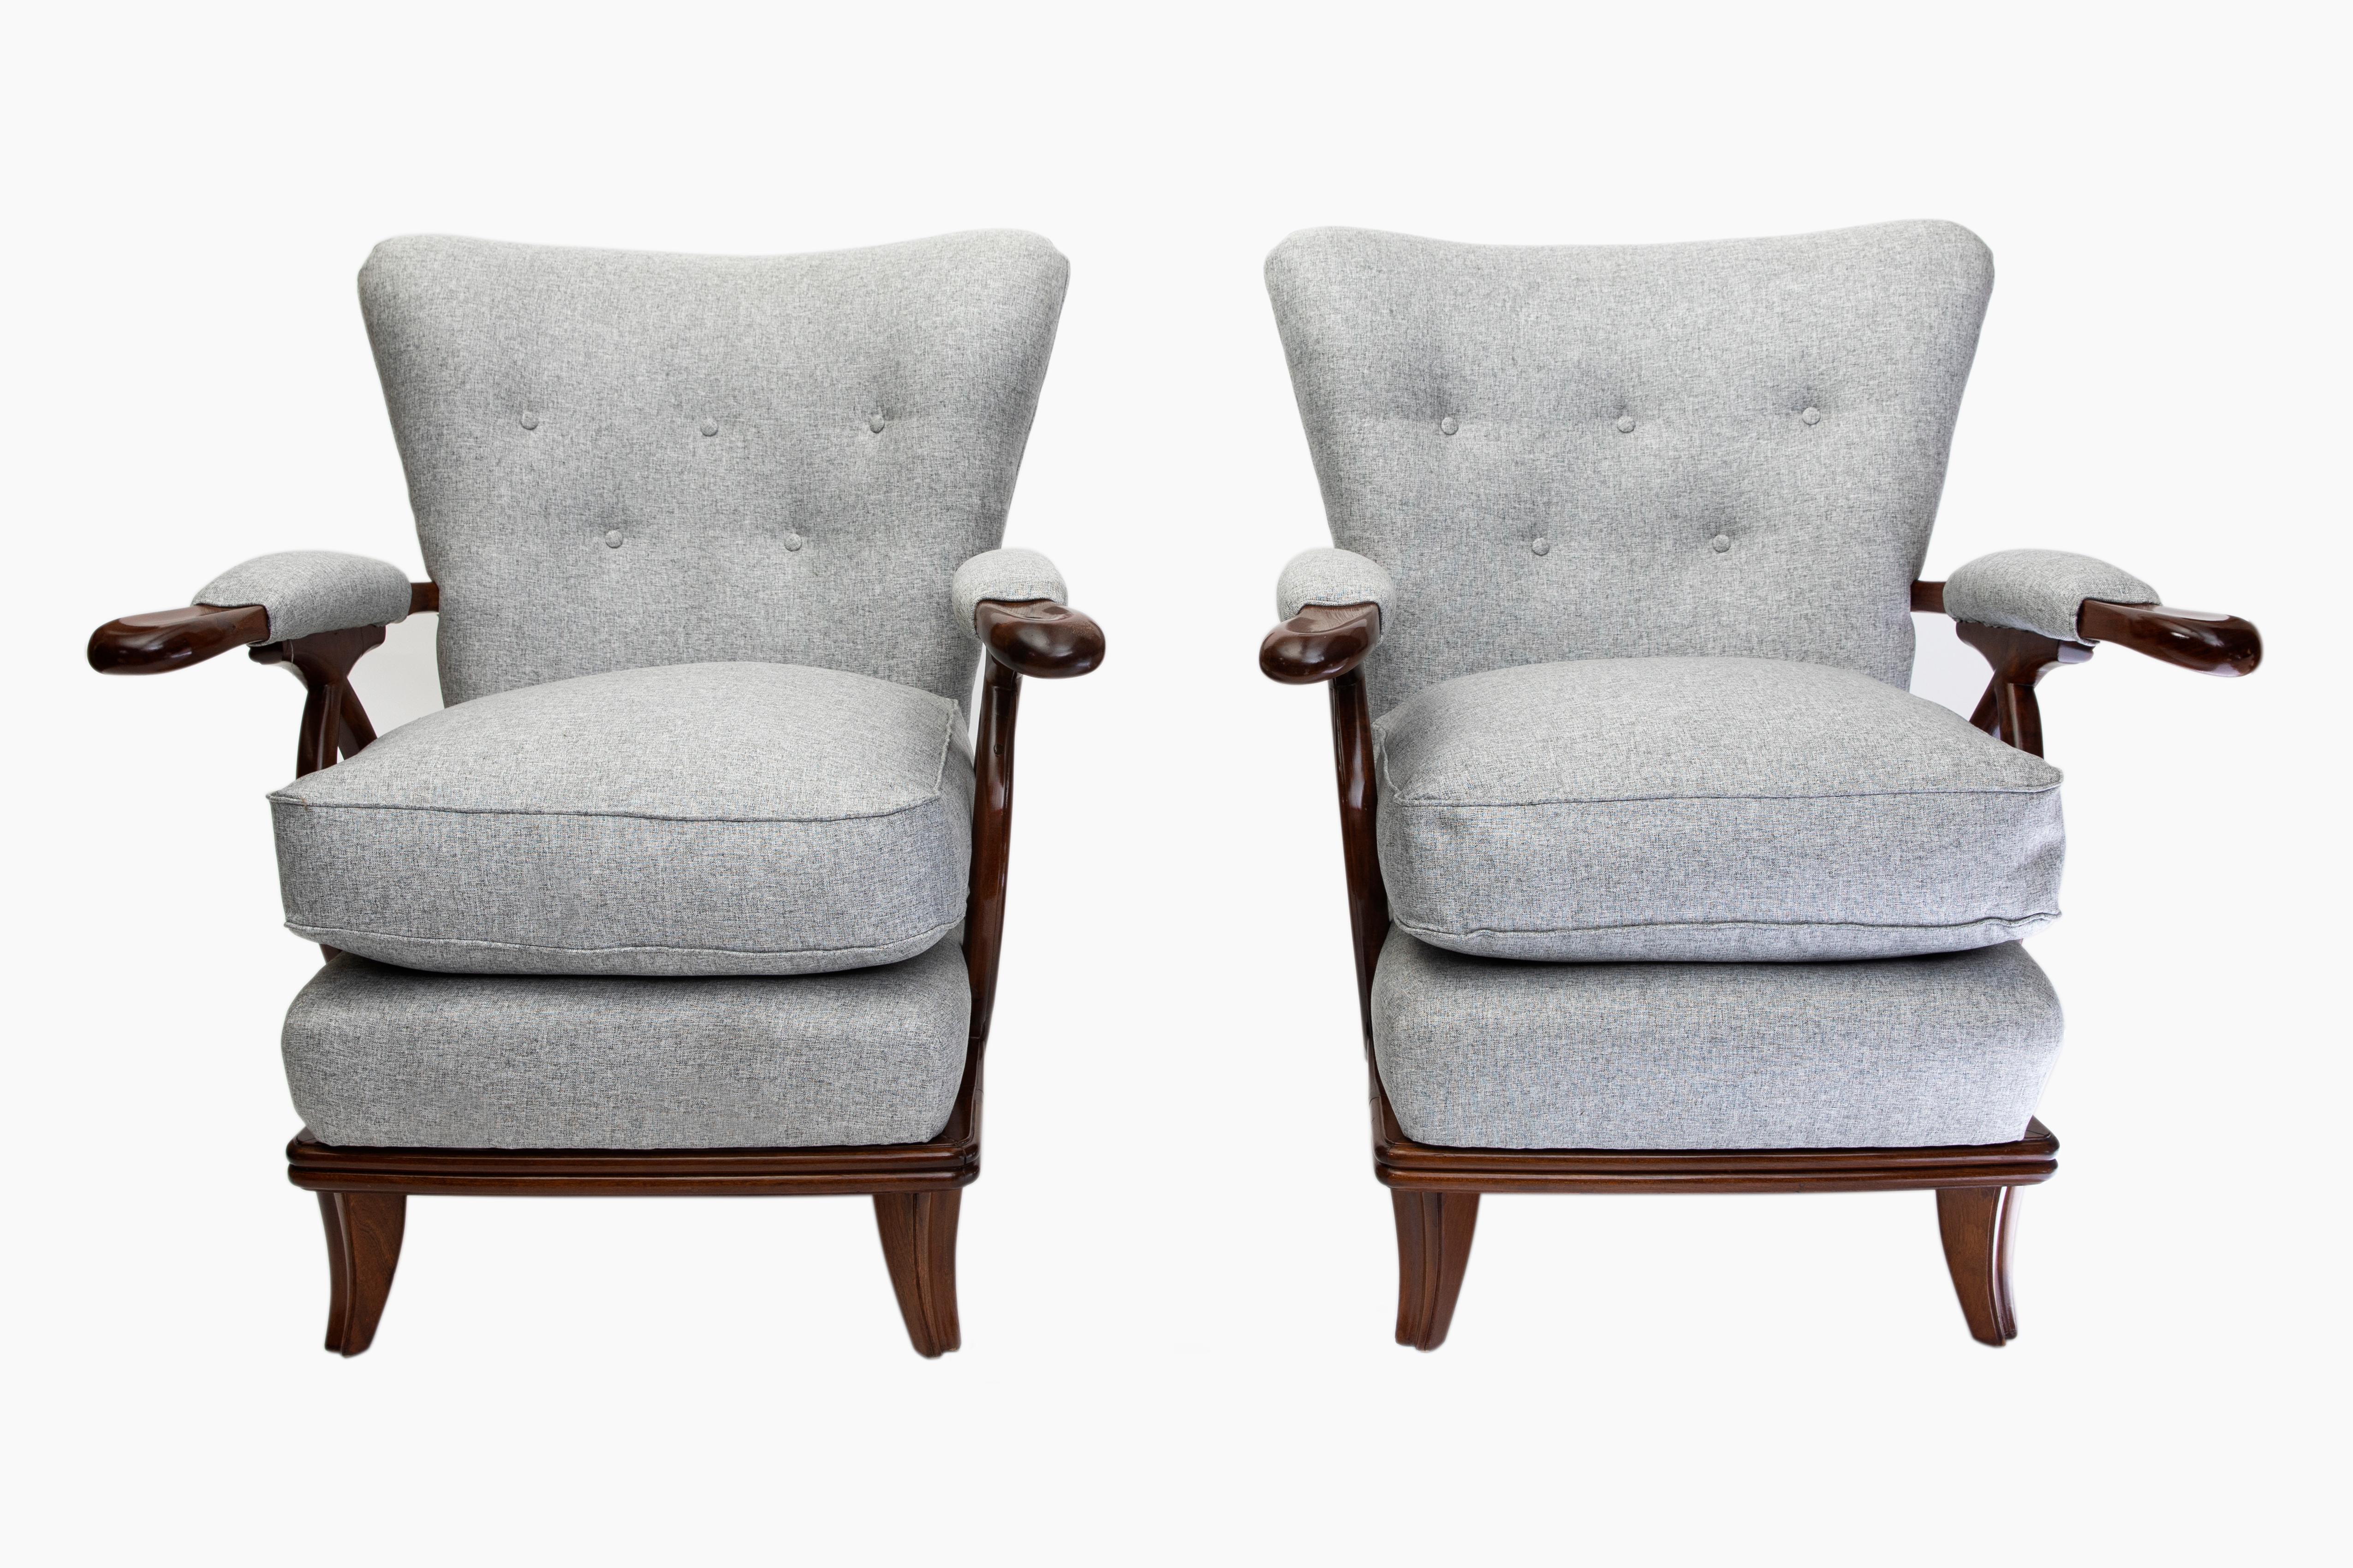 Fabric and wood three piece suite by Englander & Bonta, Argentina, circa 1950. 

Large sofa dimensions: 86 cm height, 186 cm width, 80 cm depth, 42 cm seat height.
Pair of armchairs dimensions: 90 cm height, 80 cm width, 75 cm depth, 48 cm seat